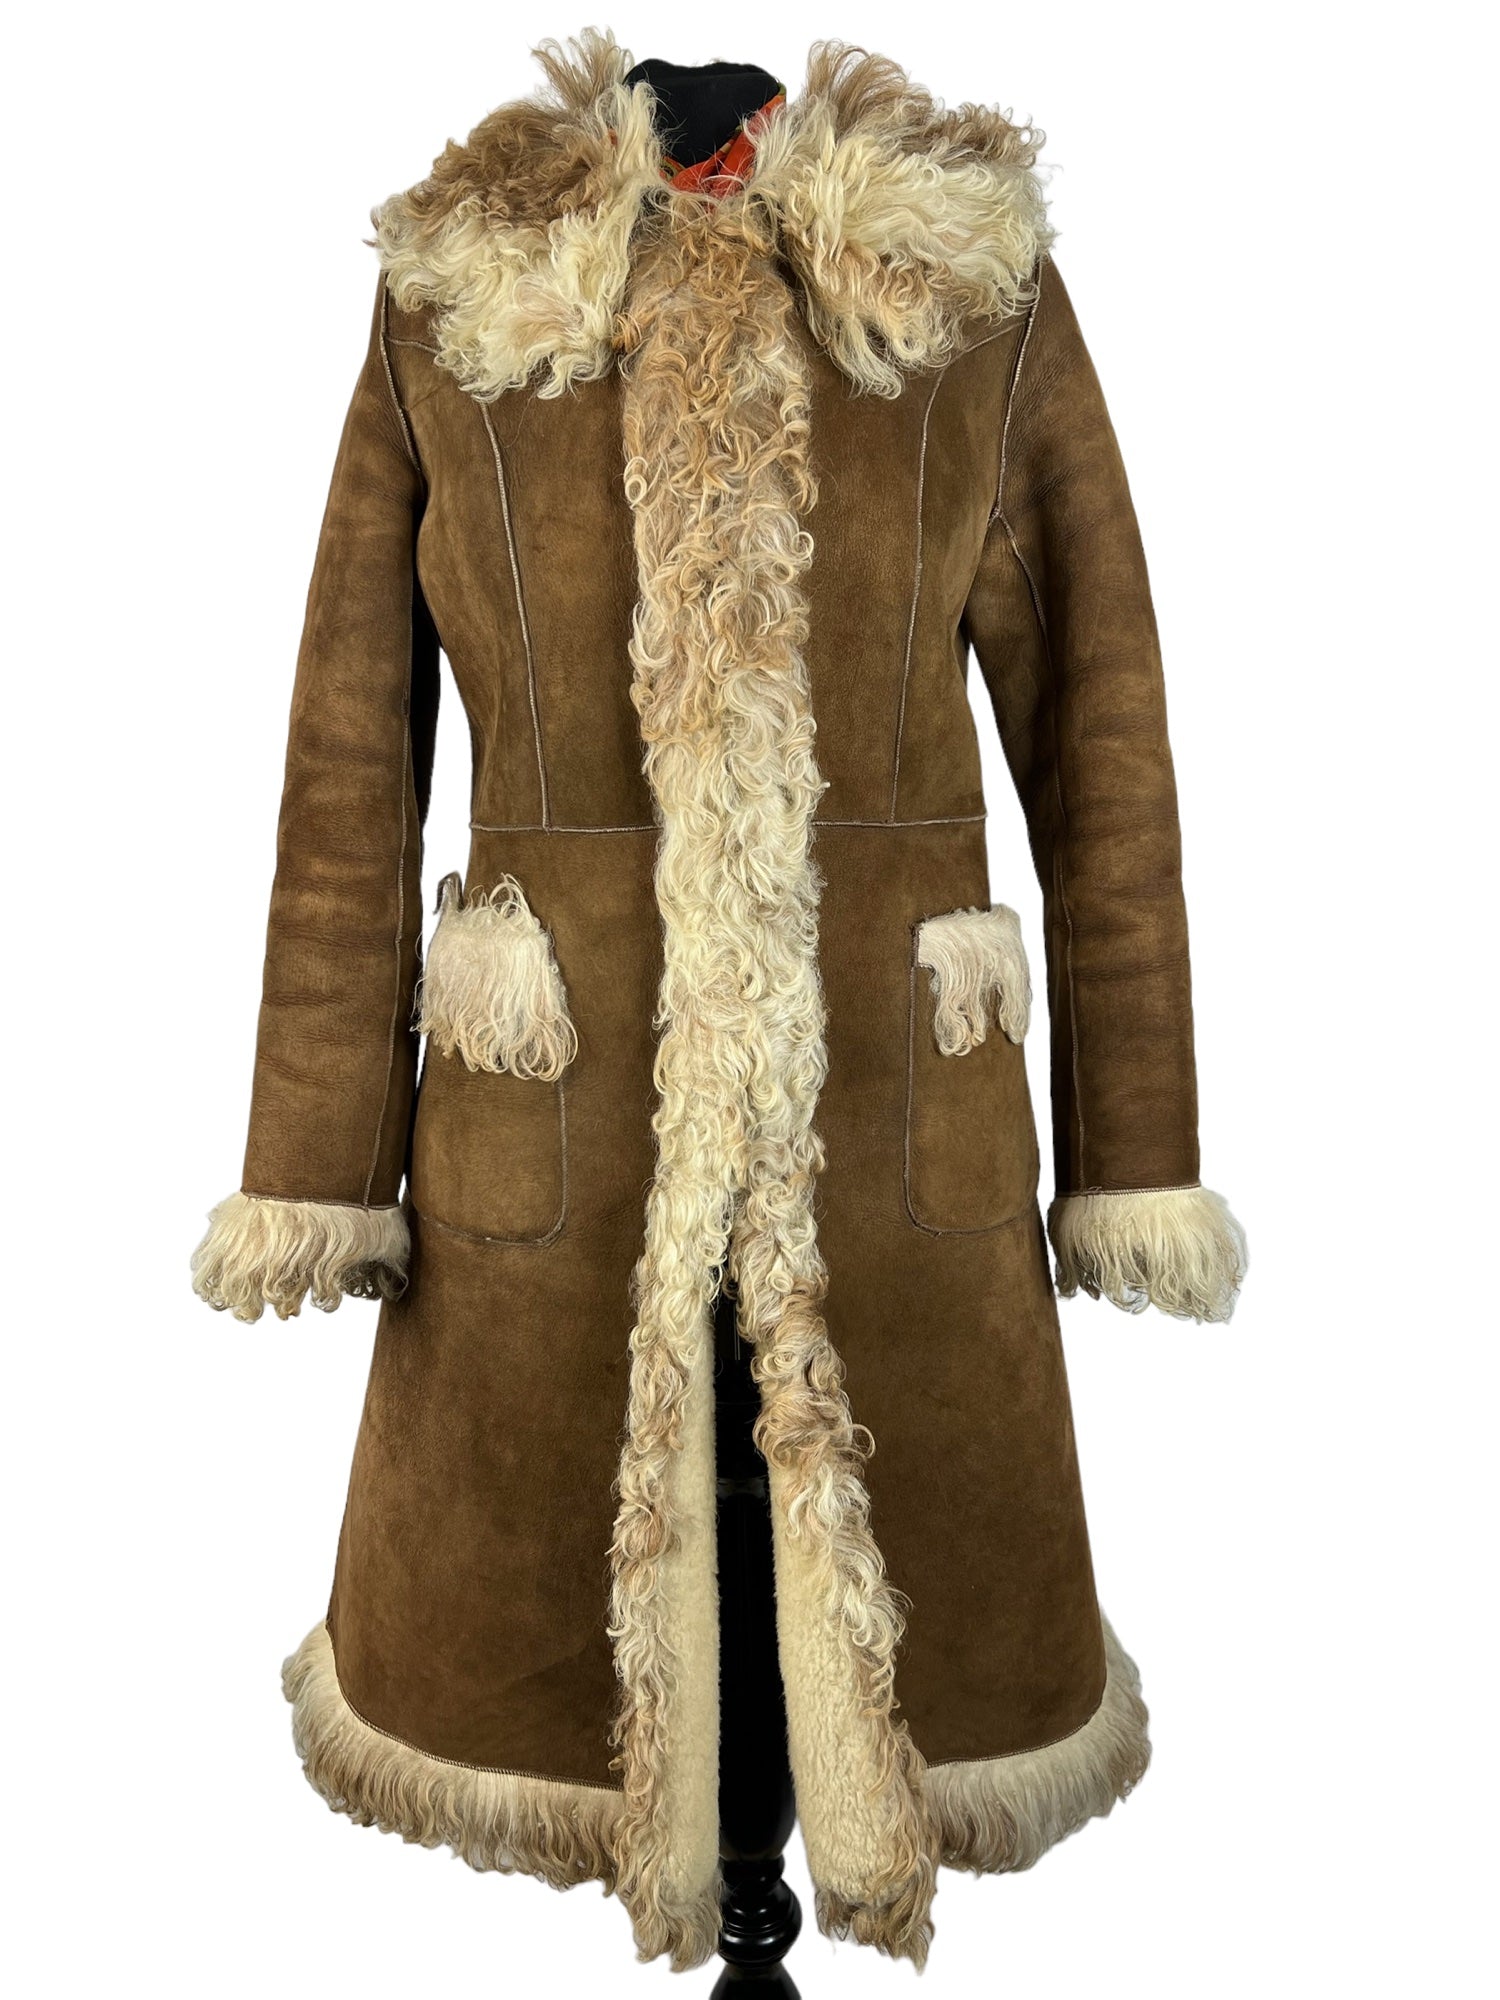 Vintage 1970s Afghan Suede Sheepskin Lined Coat in Brown by Suede and ...